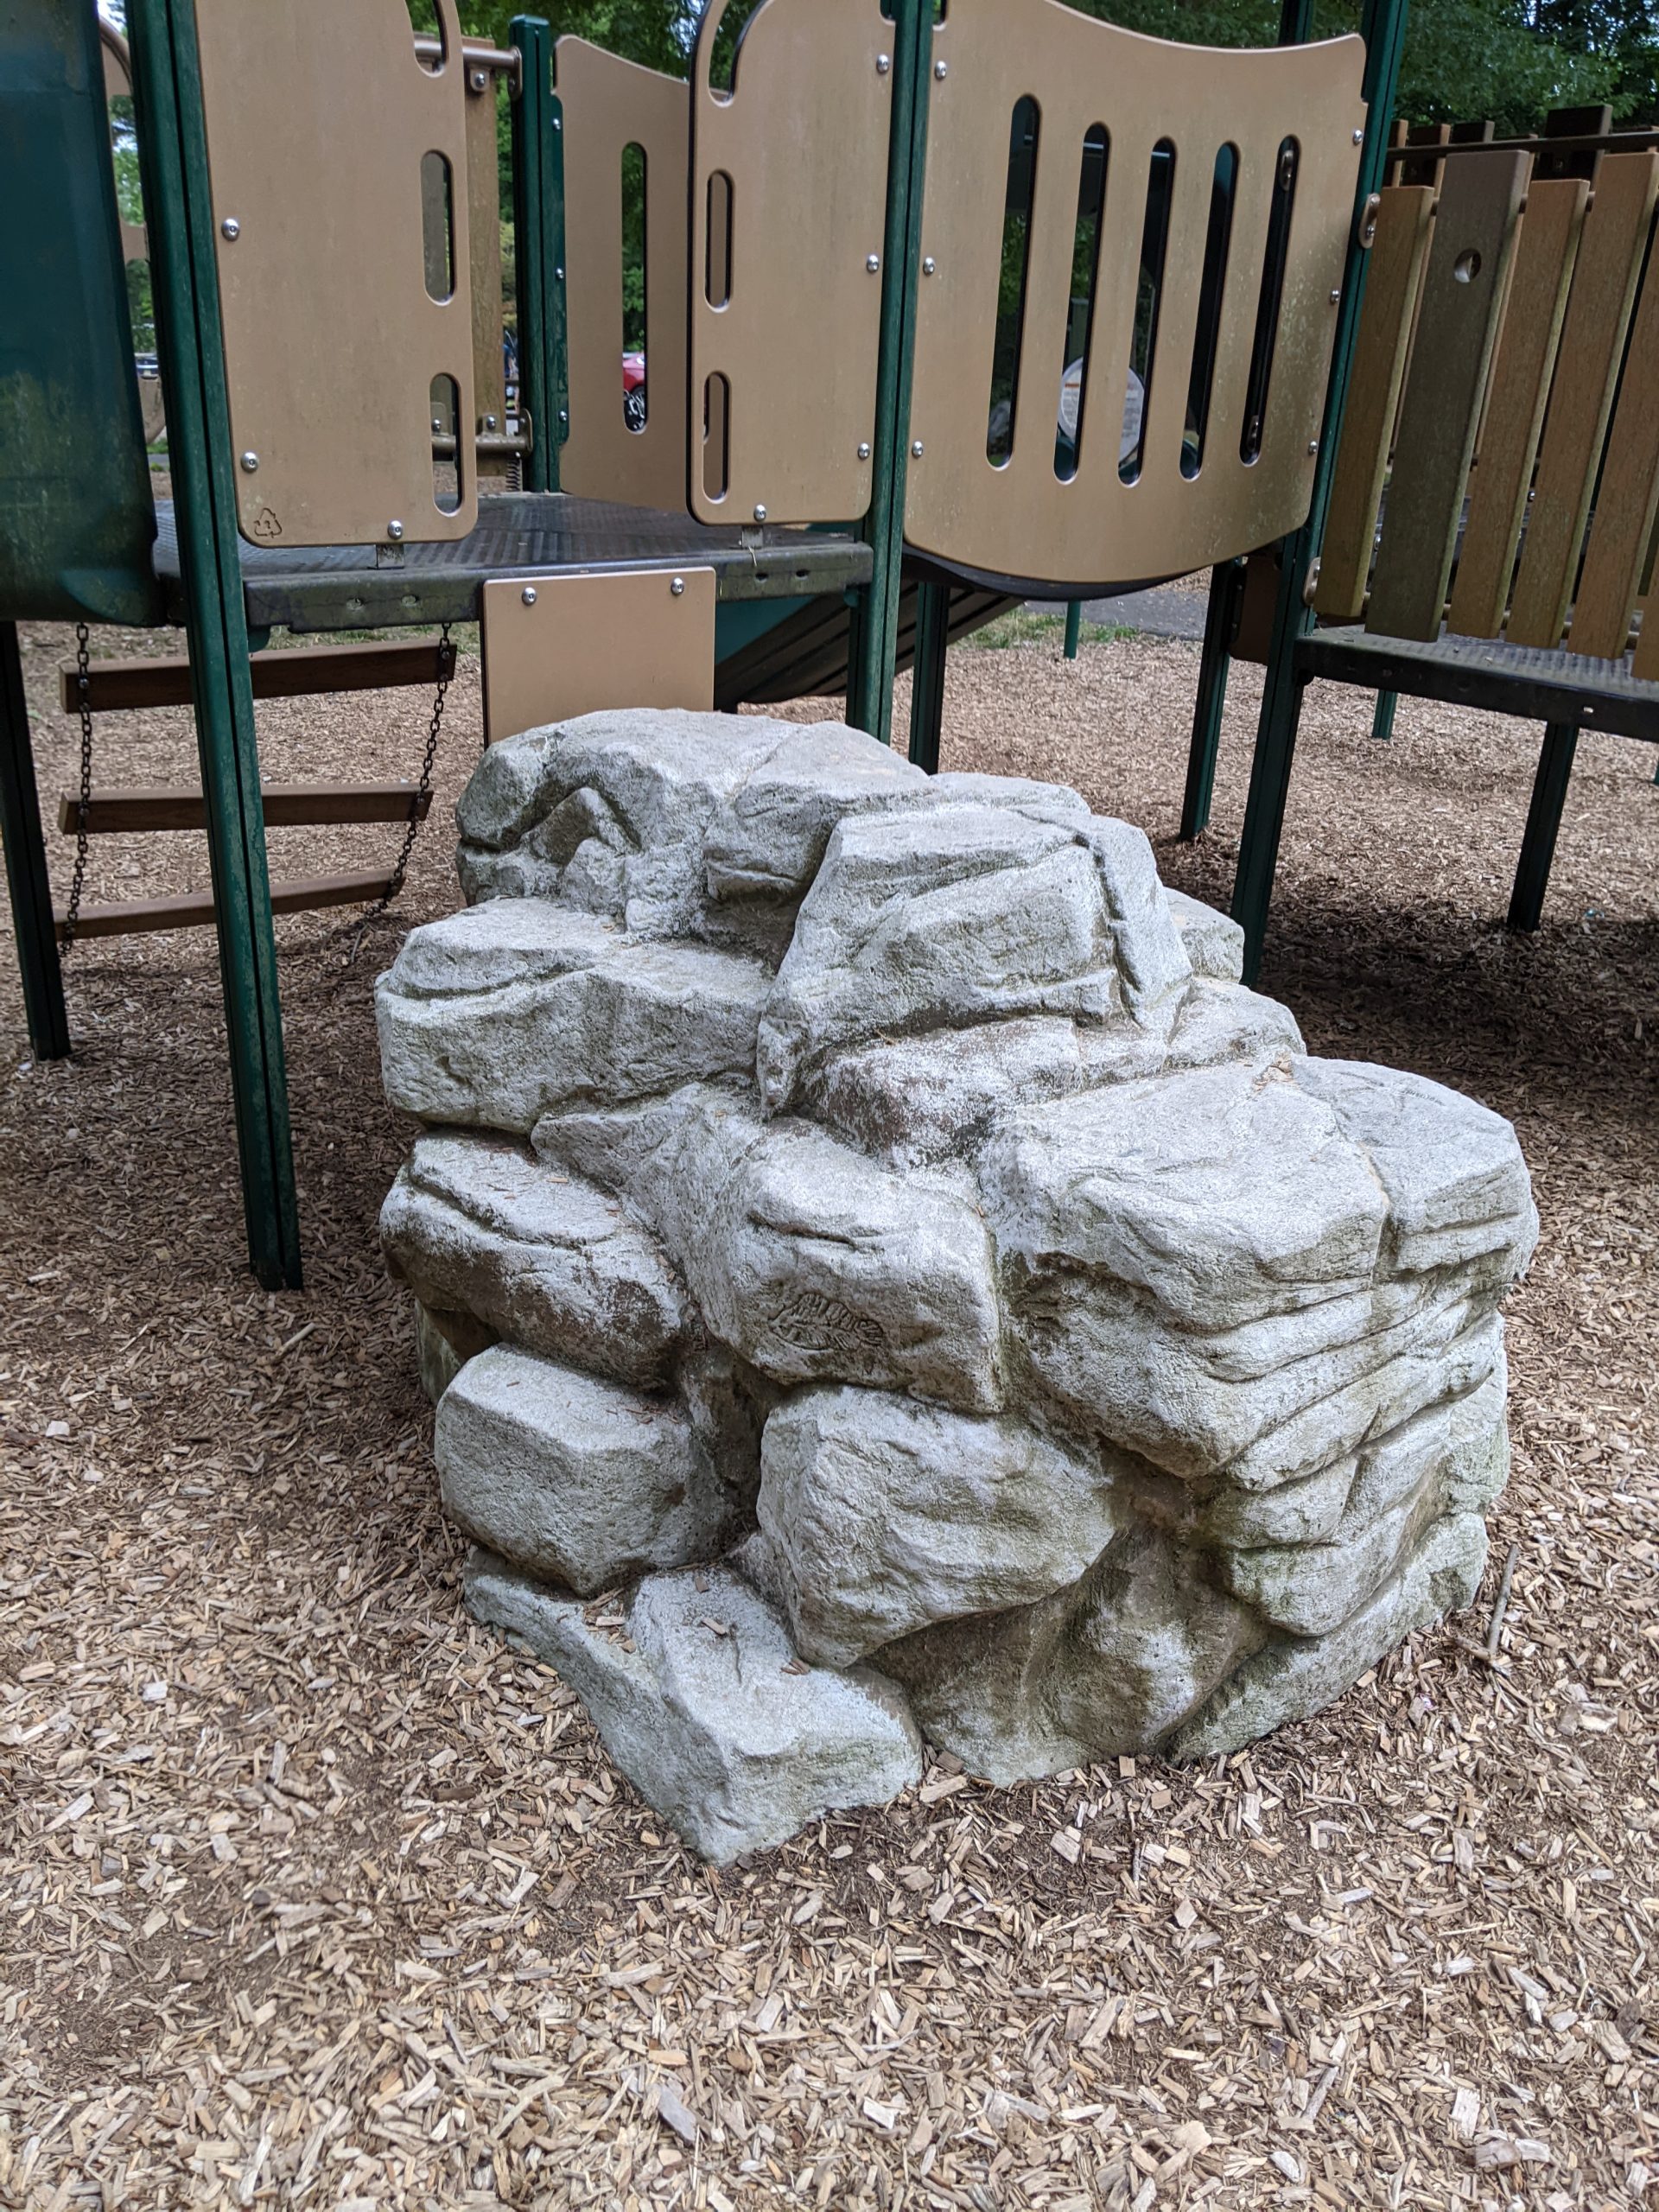 Frenchtown Boro Park Playground in Frenchtown, NJ Special Feature